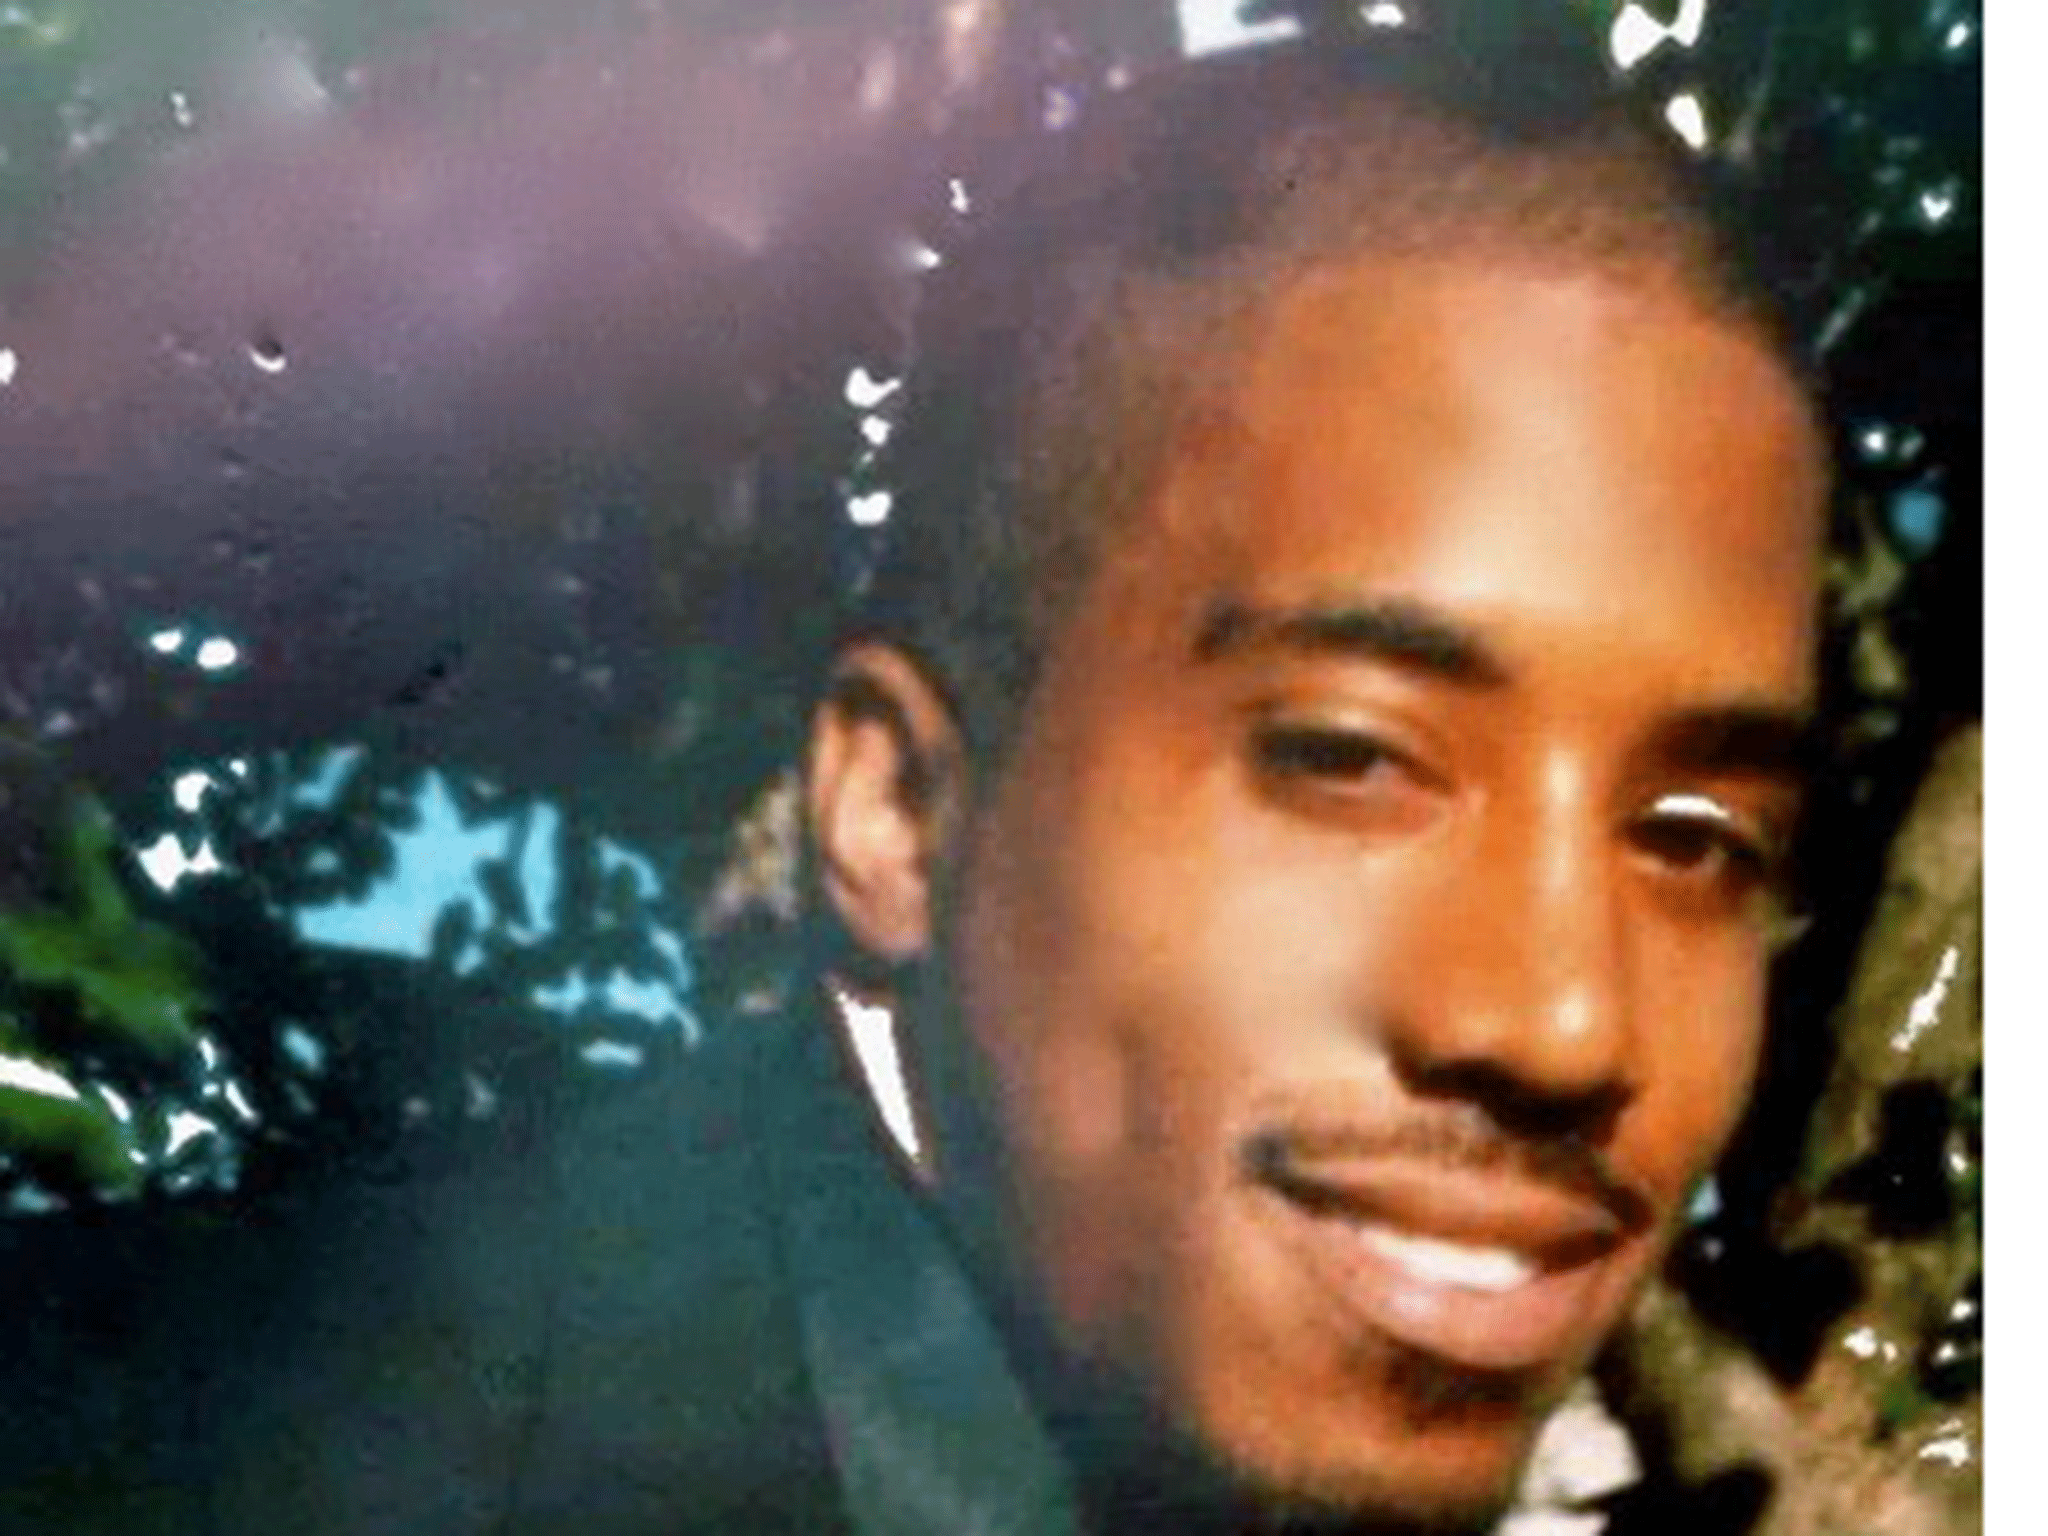 Dontre Hamilton, who was shot 14 times by a police officer